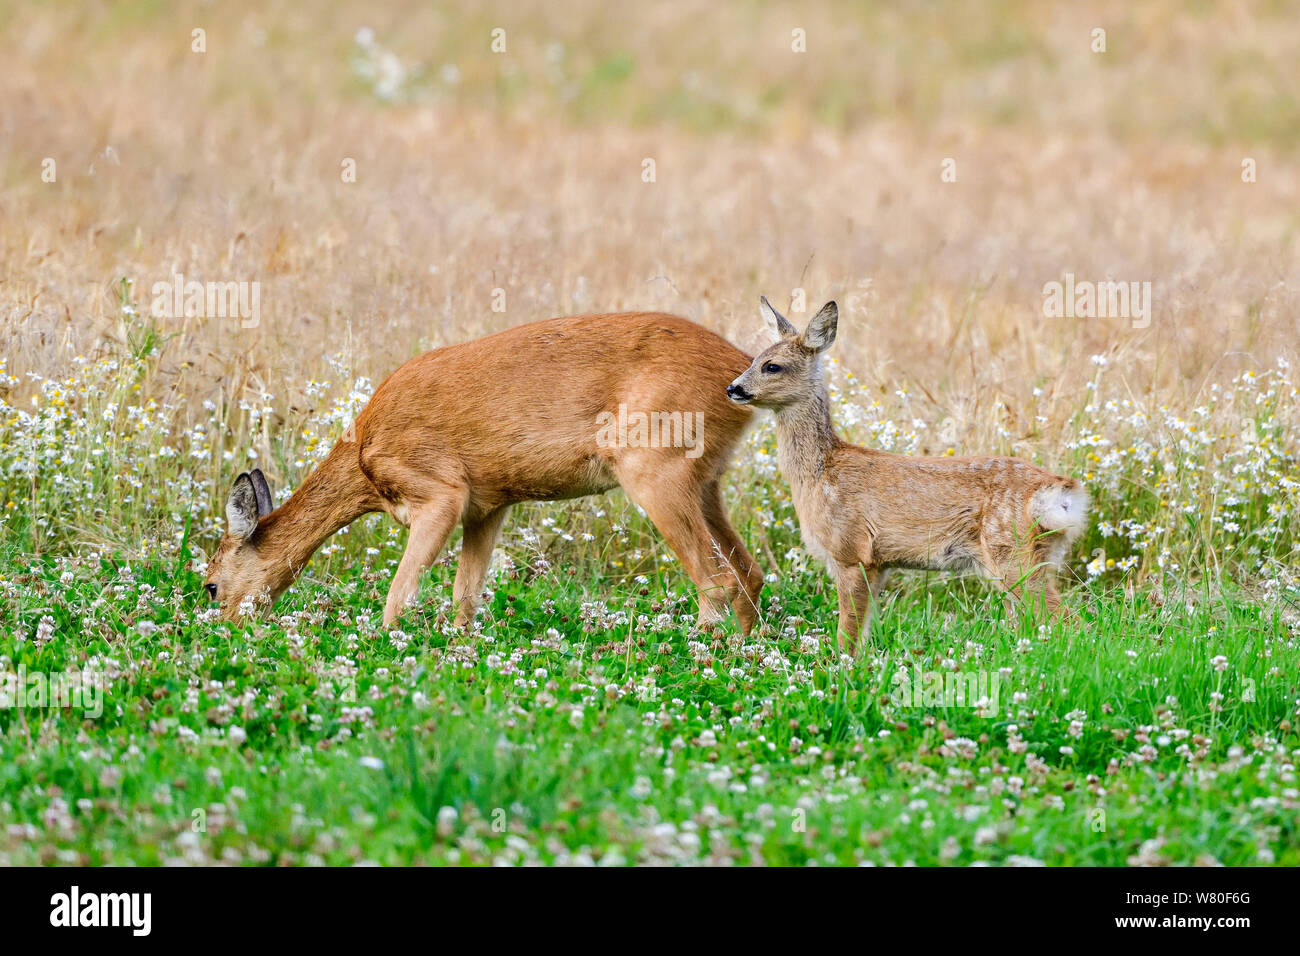 Roe deer doe with fawn Stock Photo